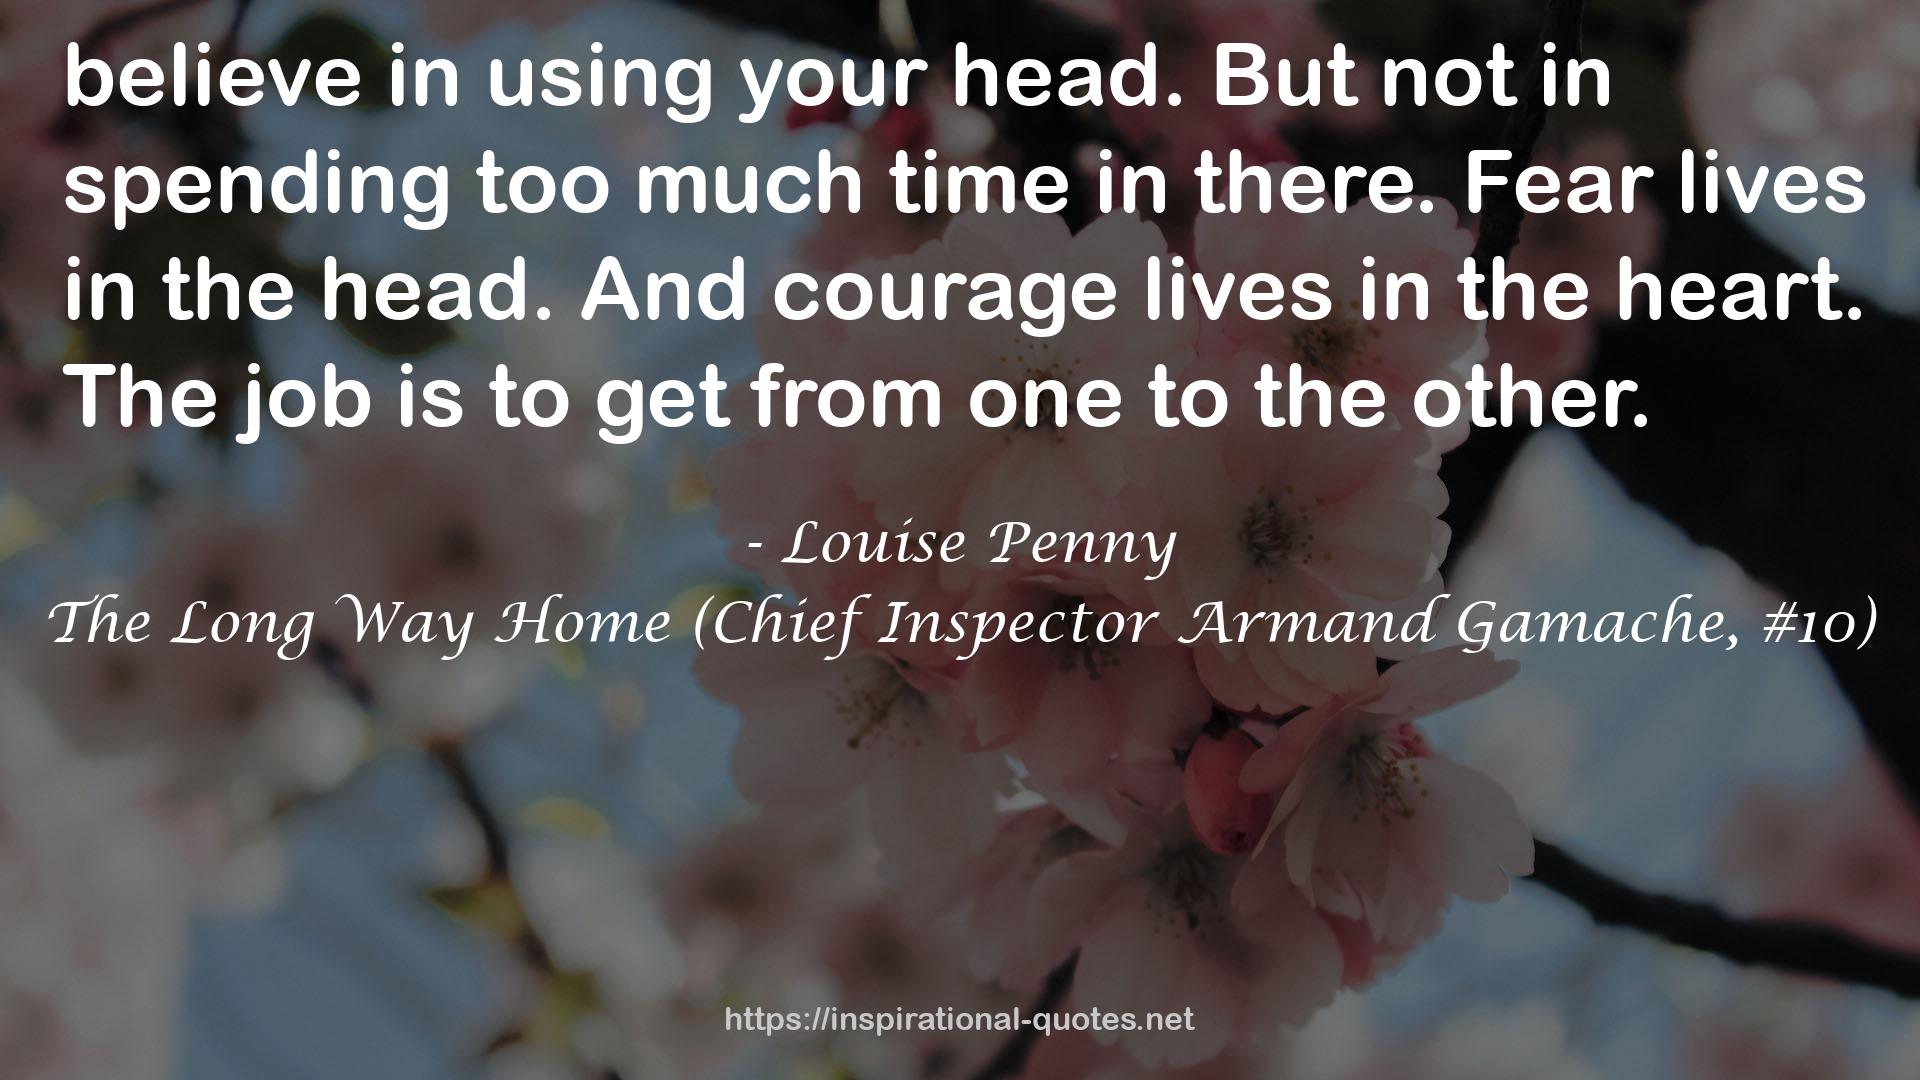 The Long Way Home (Chief Inspector Armand Gamache, #10) QUOTES